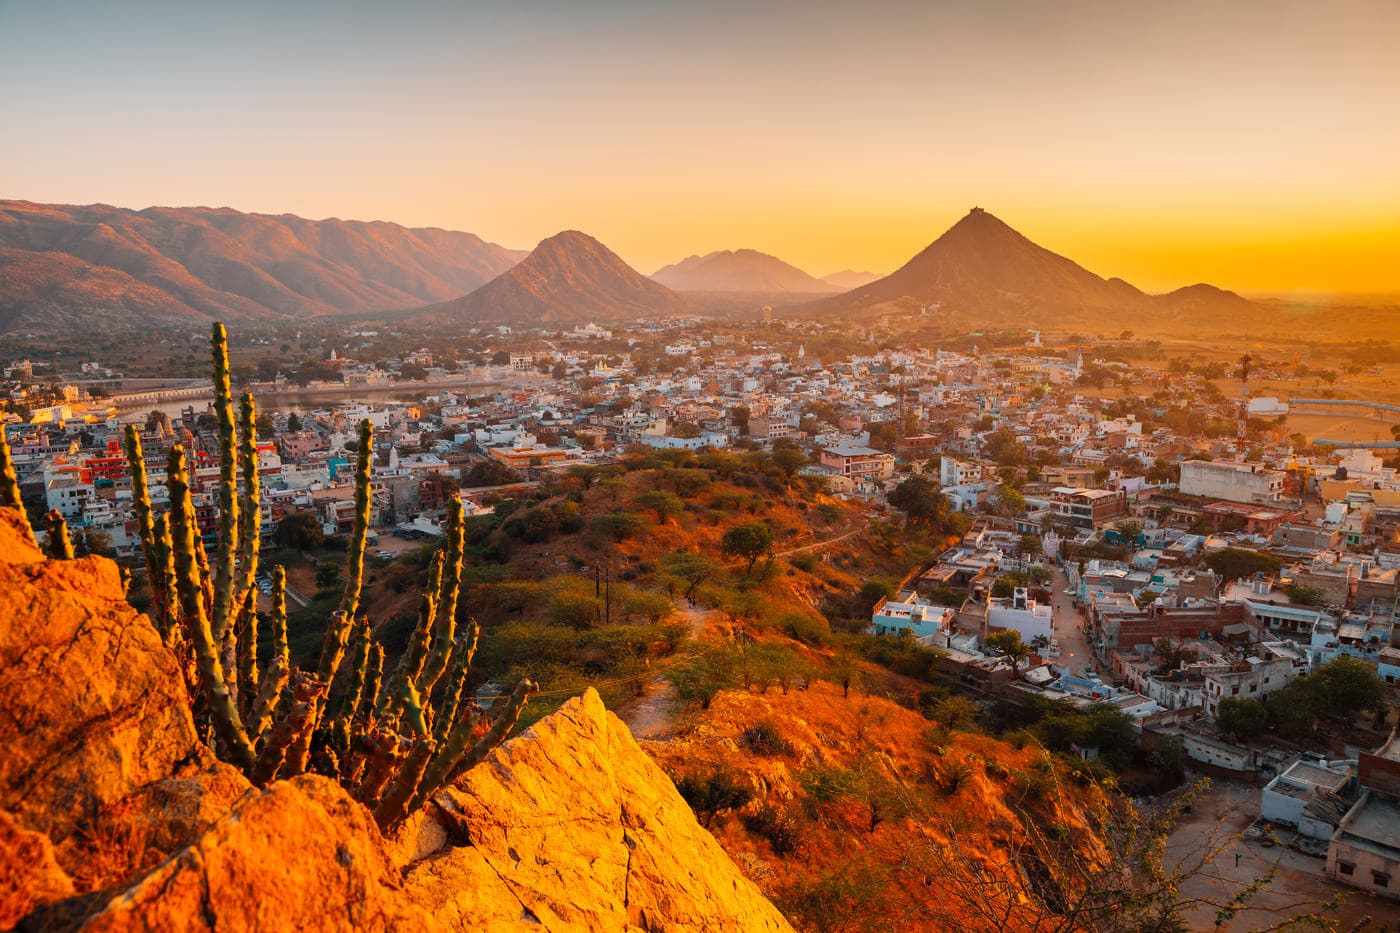 The Hindu Temple of Papmochani Mata on the hillside offers spectacular sunset views of Pushkar and its surroundings. Pushkar is one of the oldest towns in India, mentioned in texts dating back to the first millennium 